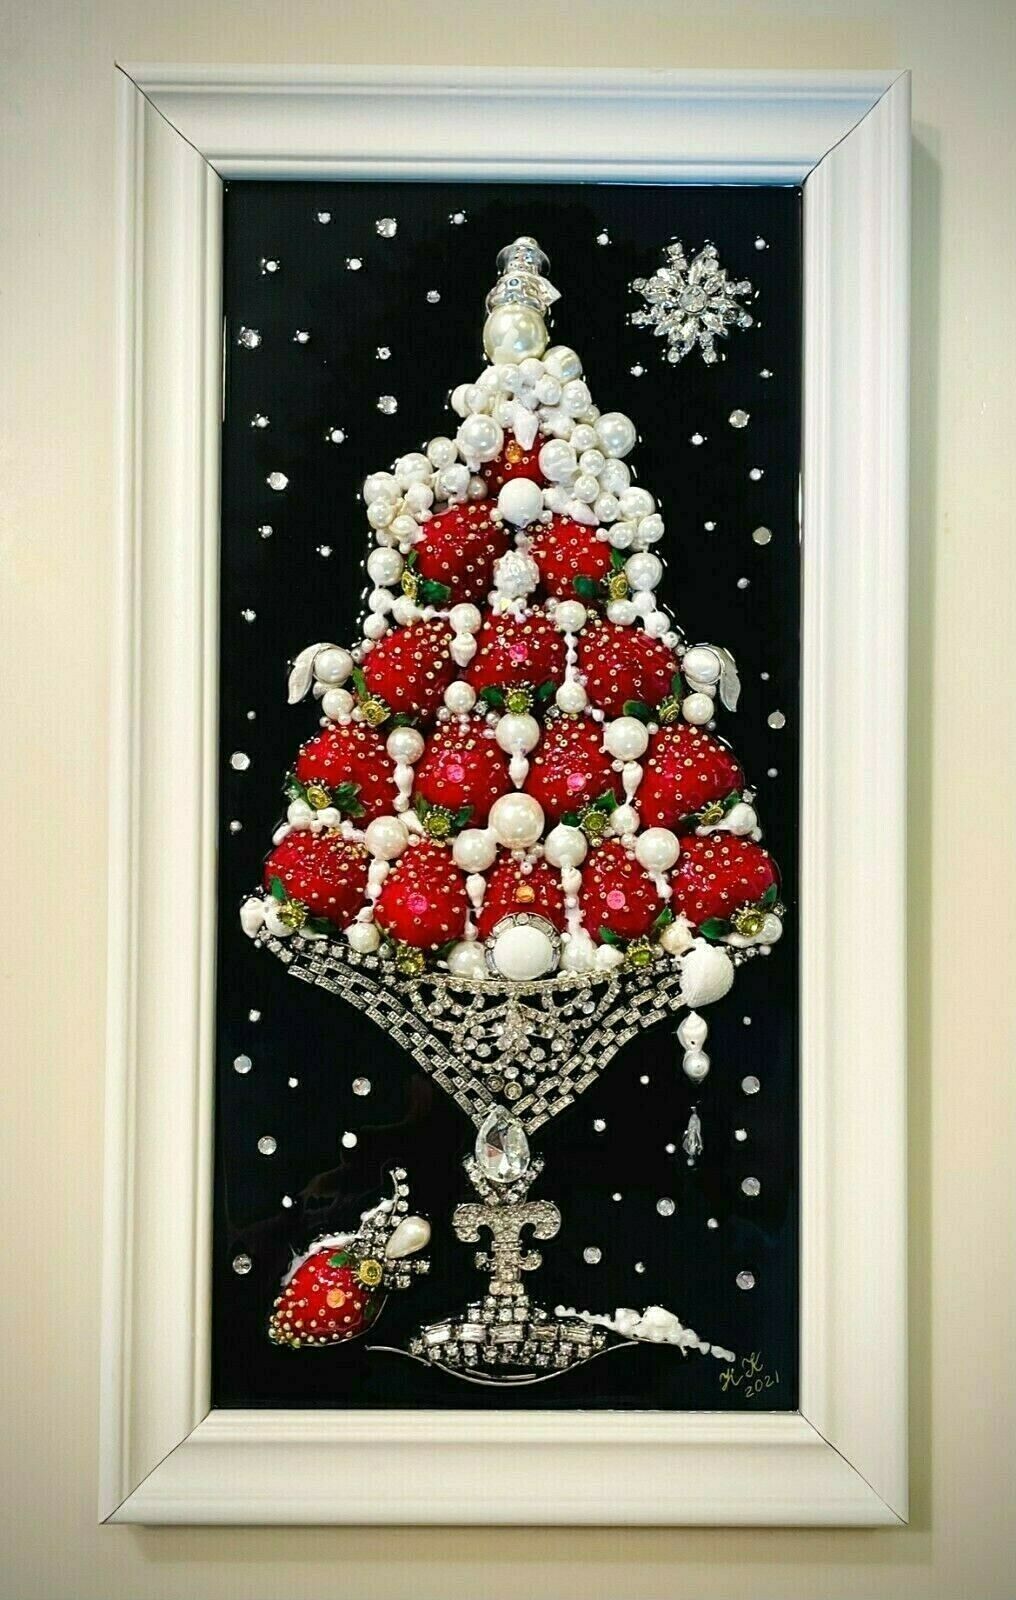 Christmas Tree, Strawberry Dessert, Framed Jewelry One Of A Kind Art Unique Gift